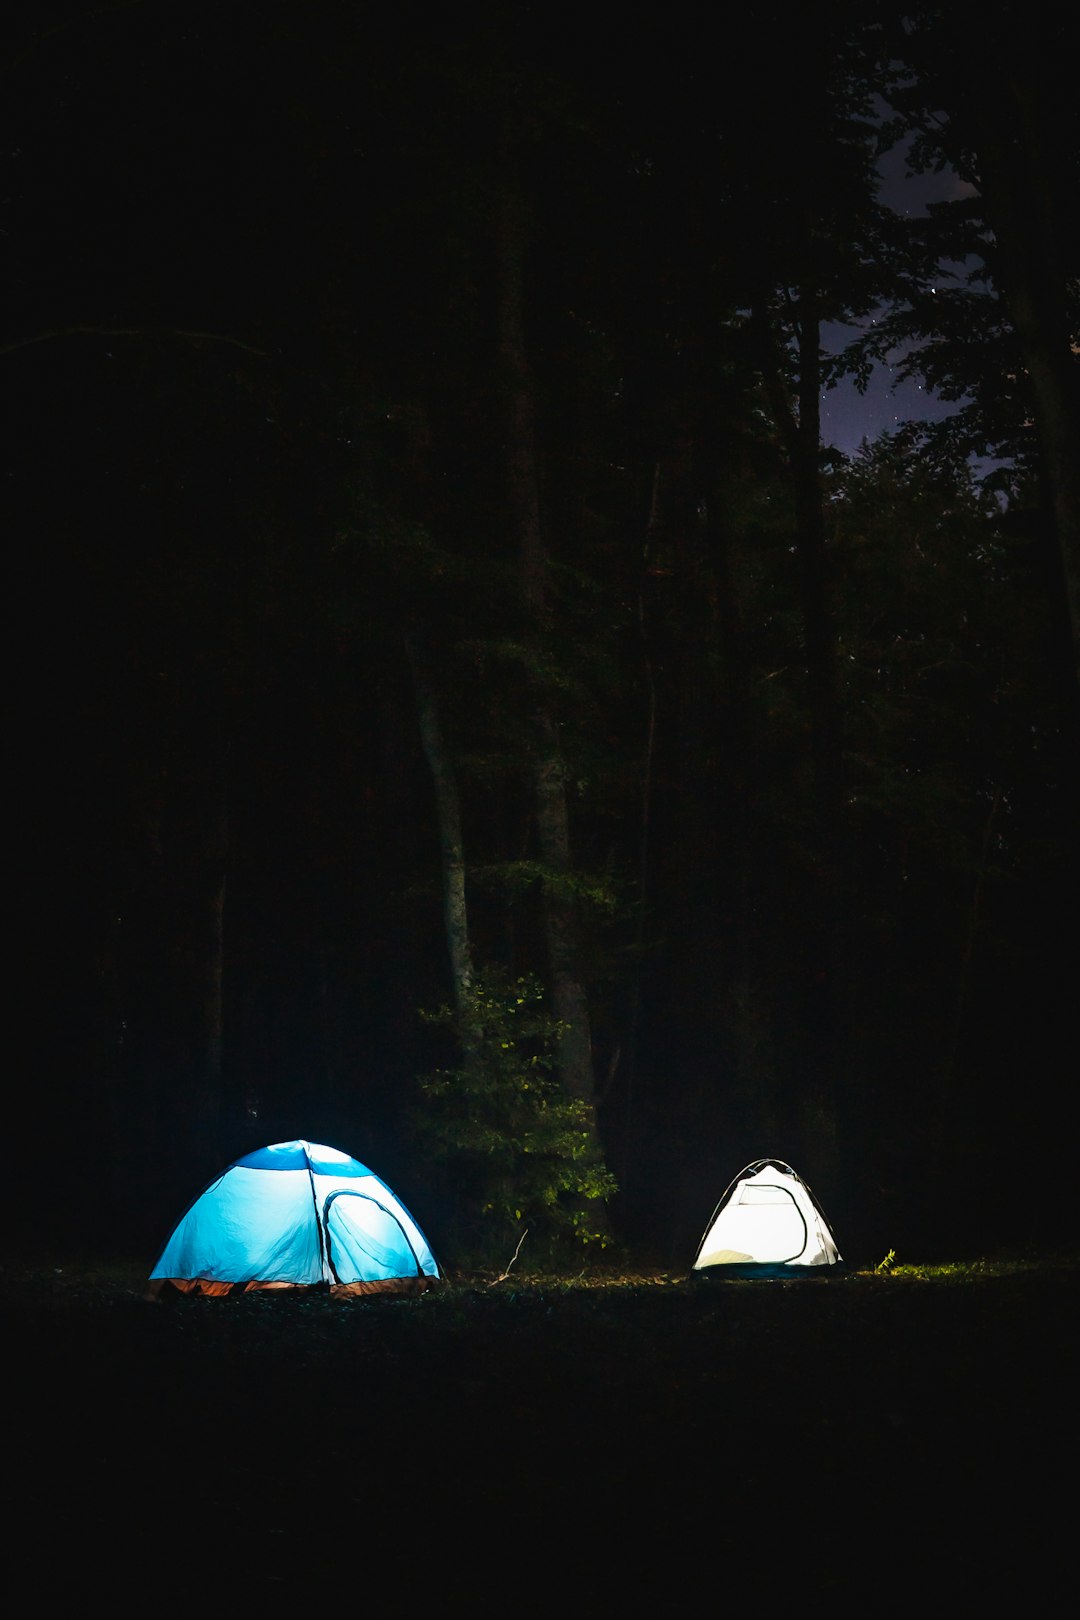 blue and white tent in forest during night time